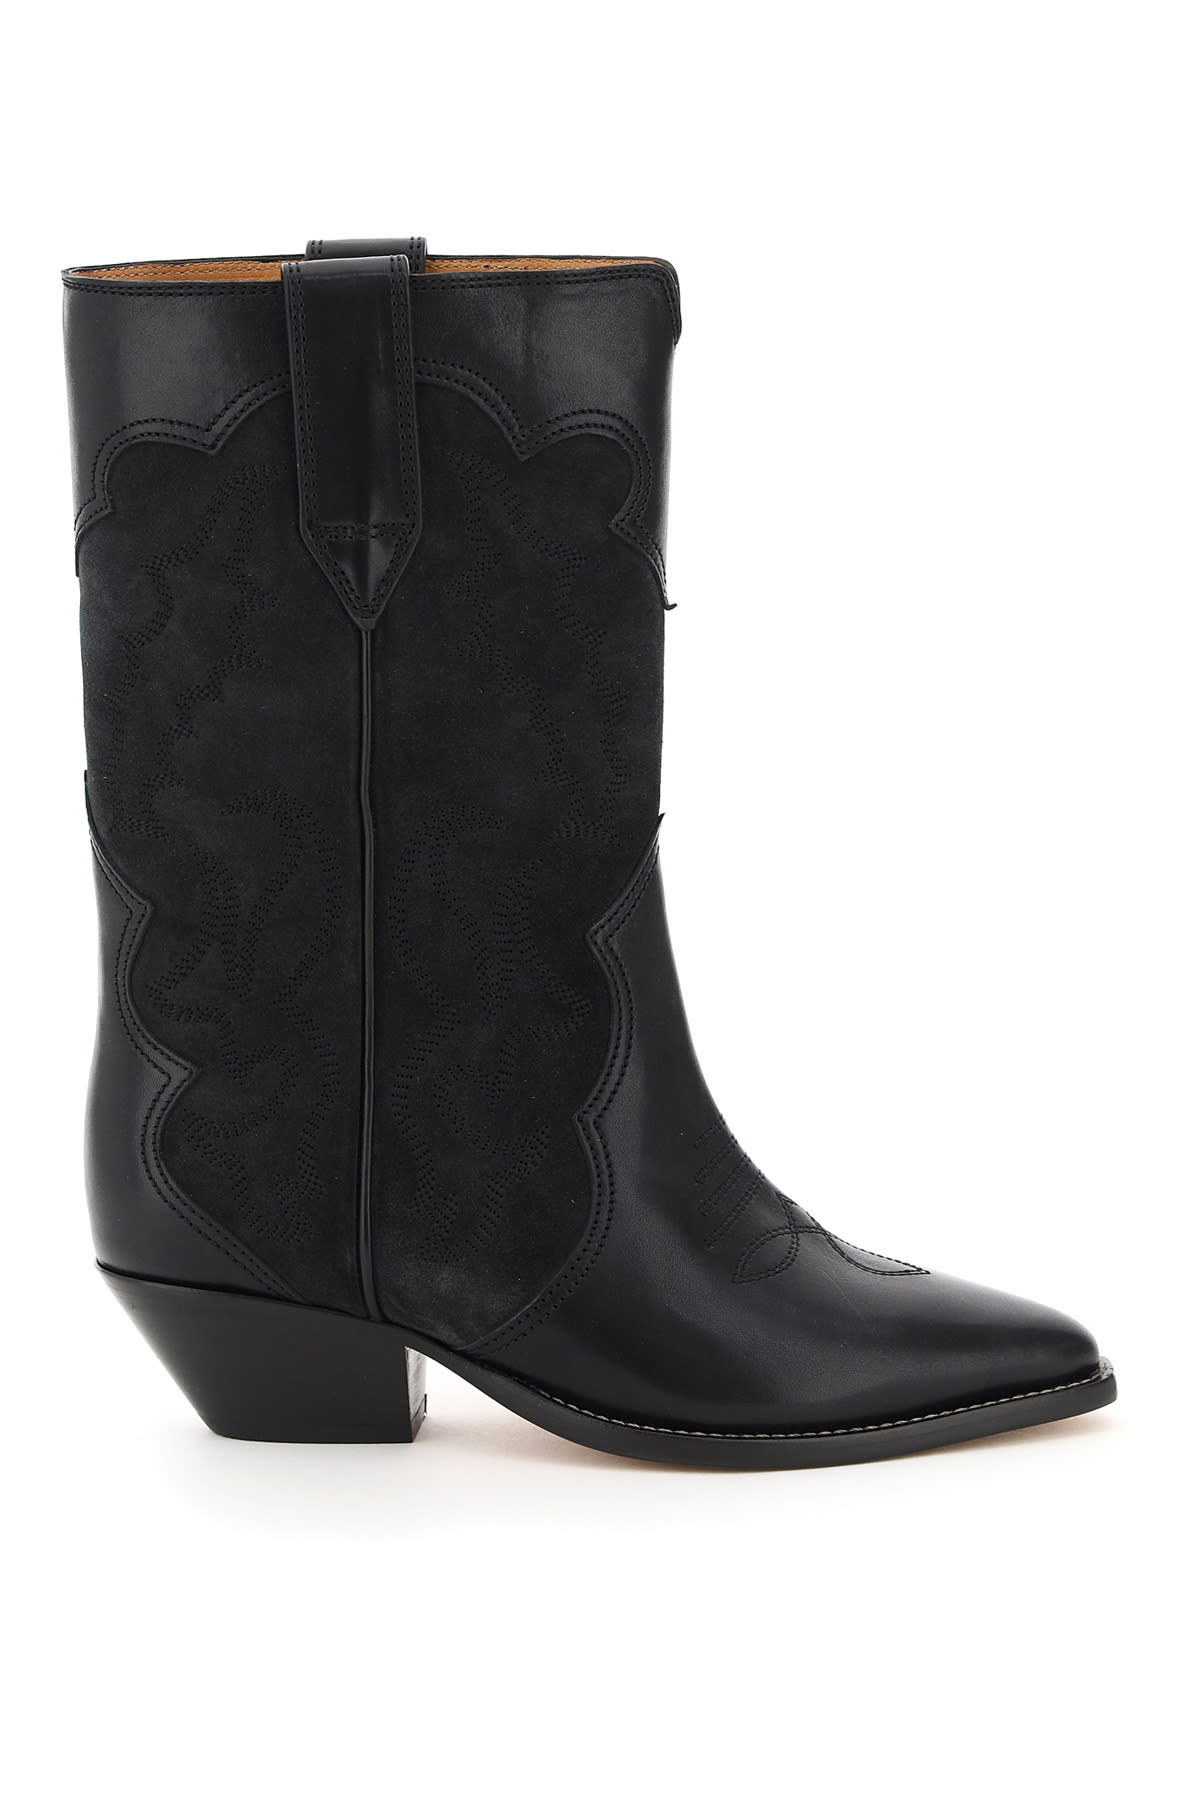 Buy Isabel Marant Duerto Boots online, shop Isabel Marant shoes with free shipping